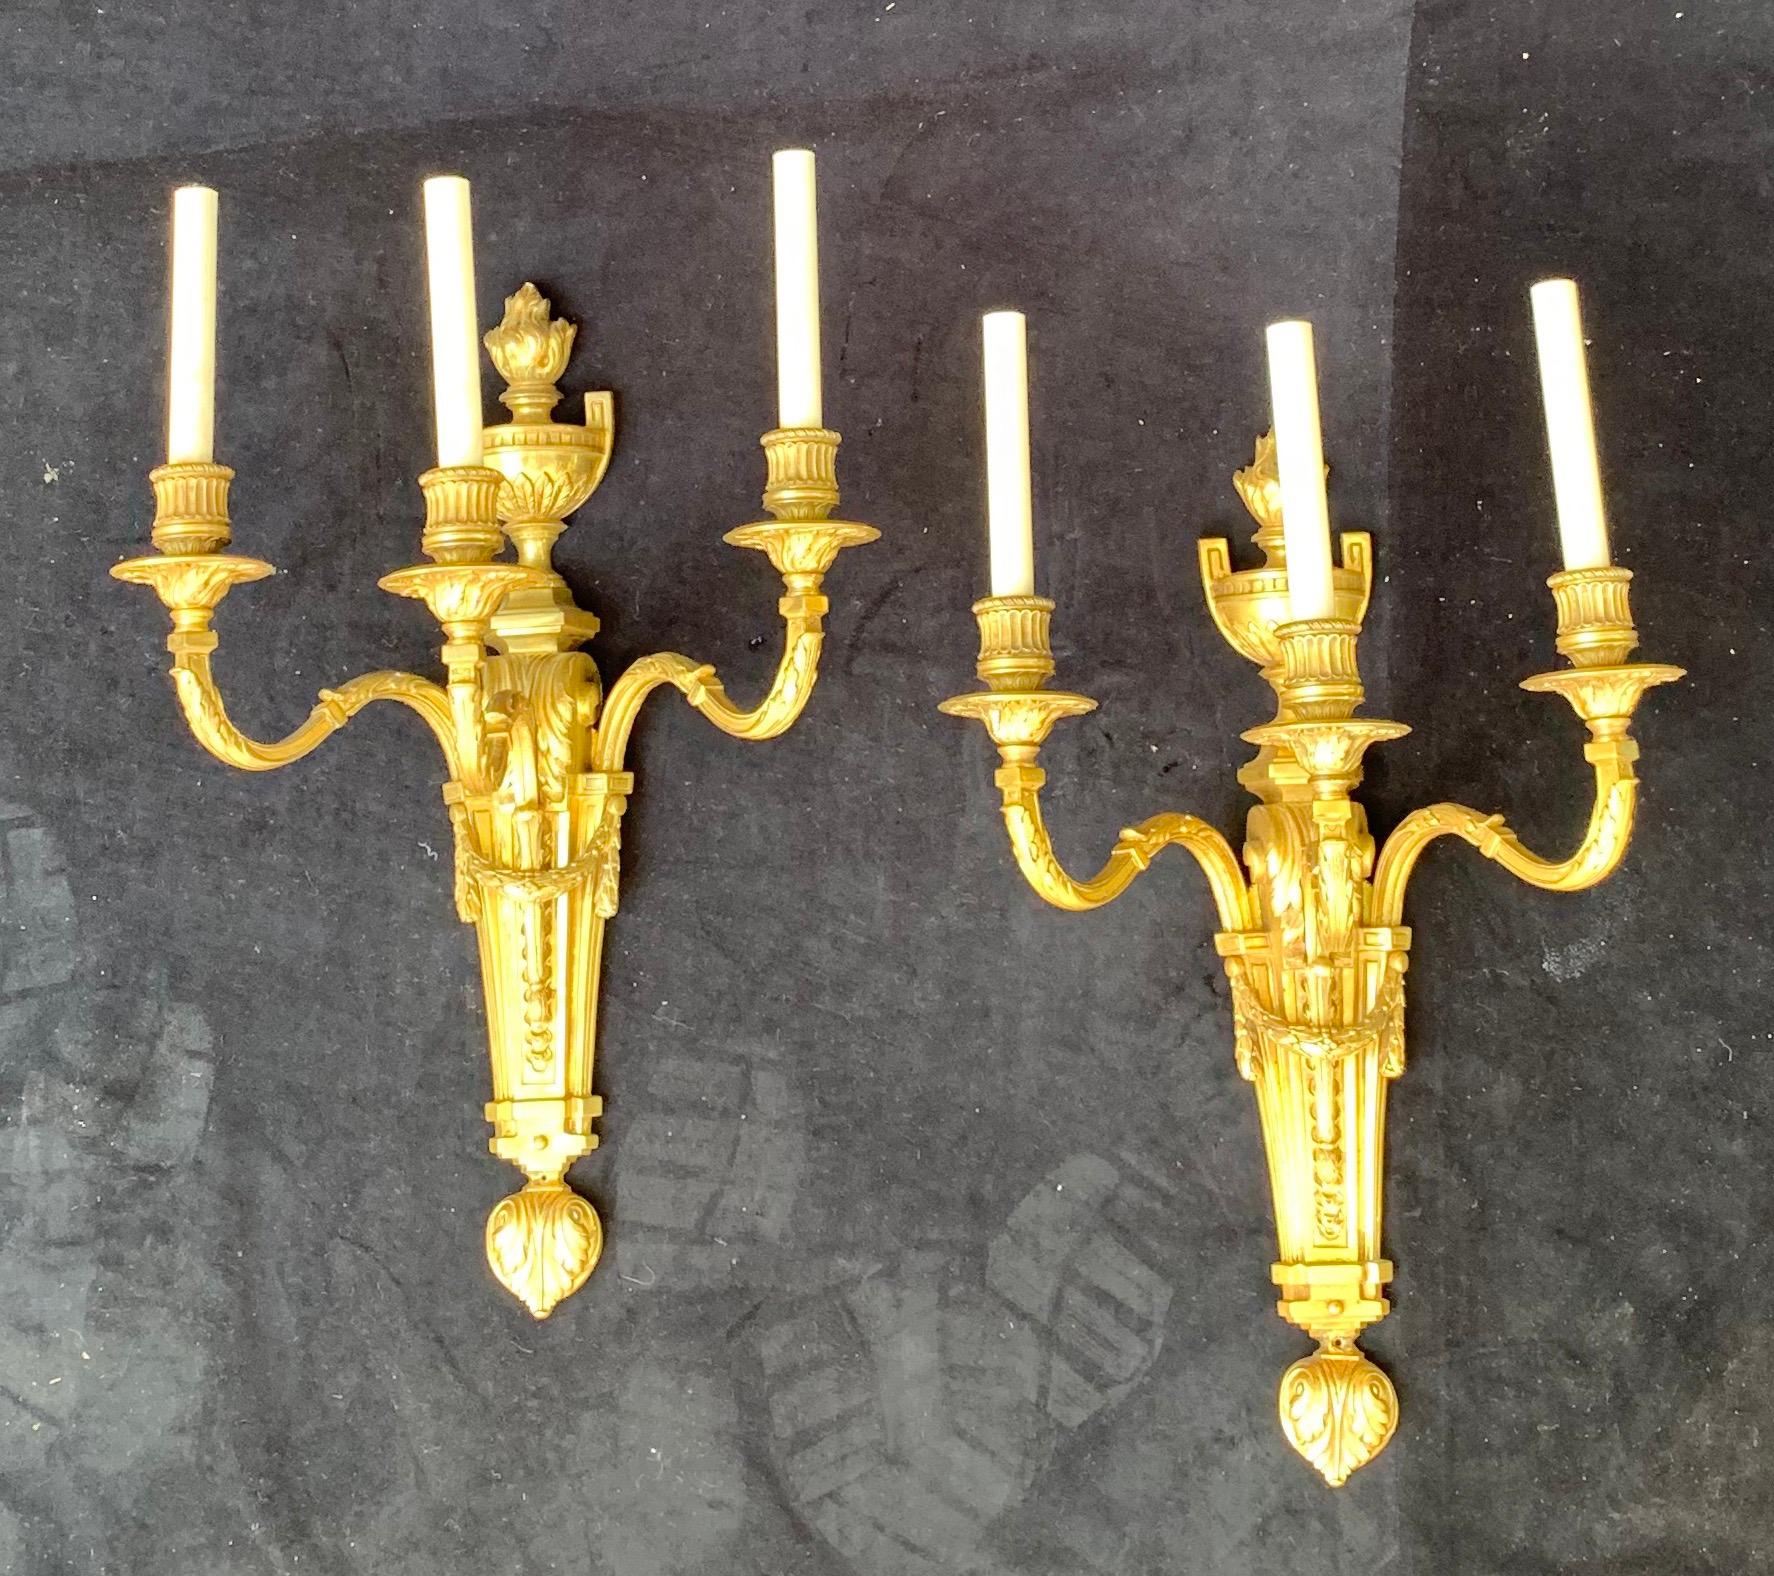 Wonderful Large Pair of French Urn Garland Neoclassical Bronze Caldwell Sconces (Neoklassisch)